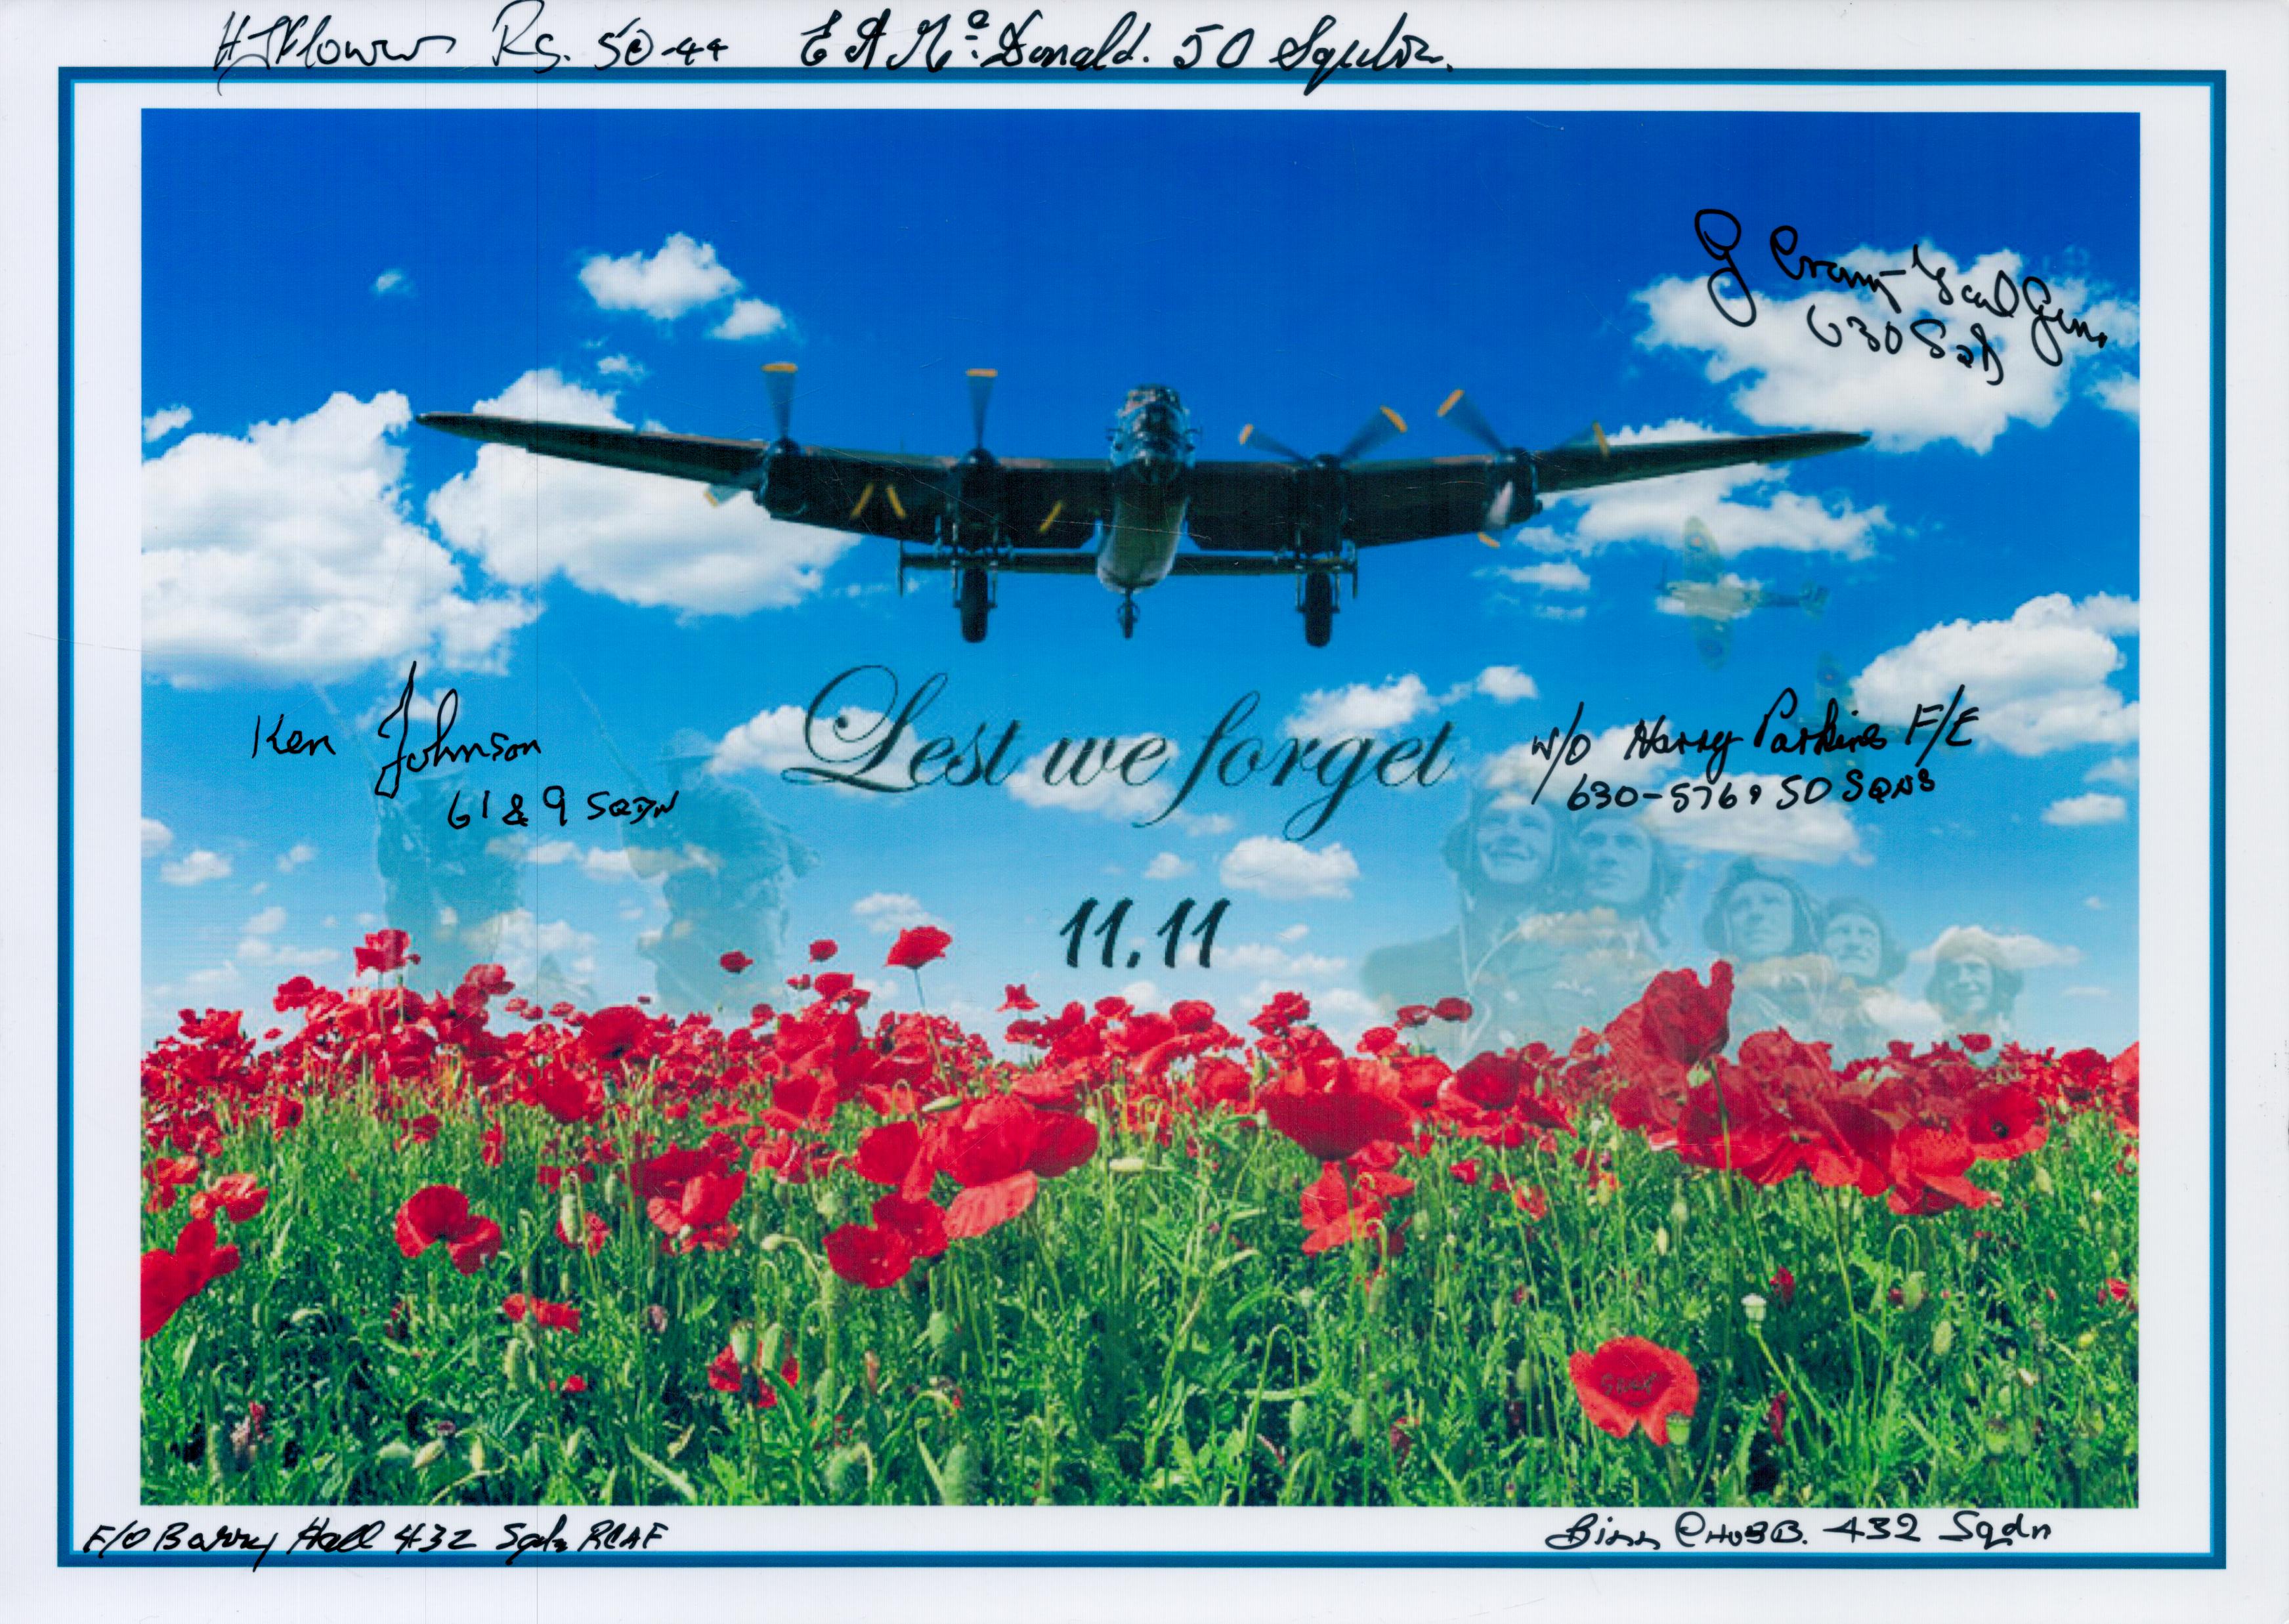 A Collage of an Airman, A Lancaster in Flight over a Poppy Field, Lest We Forget, Colour Photo